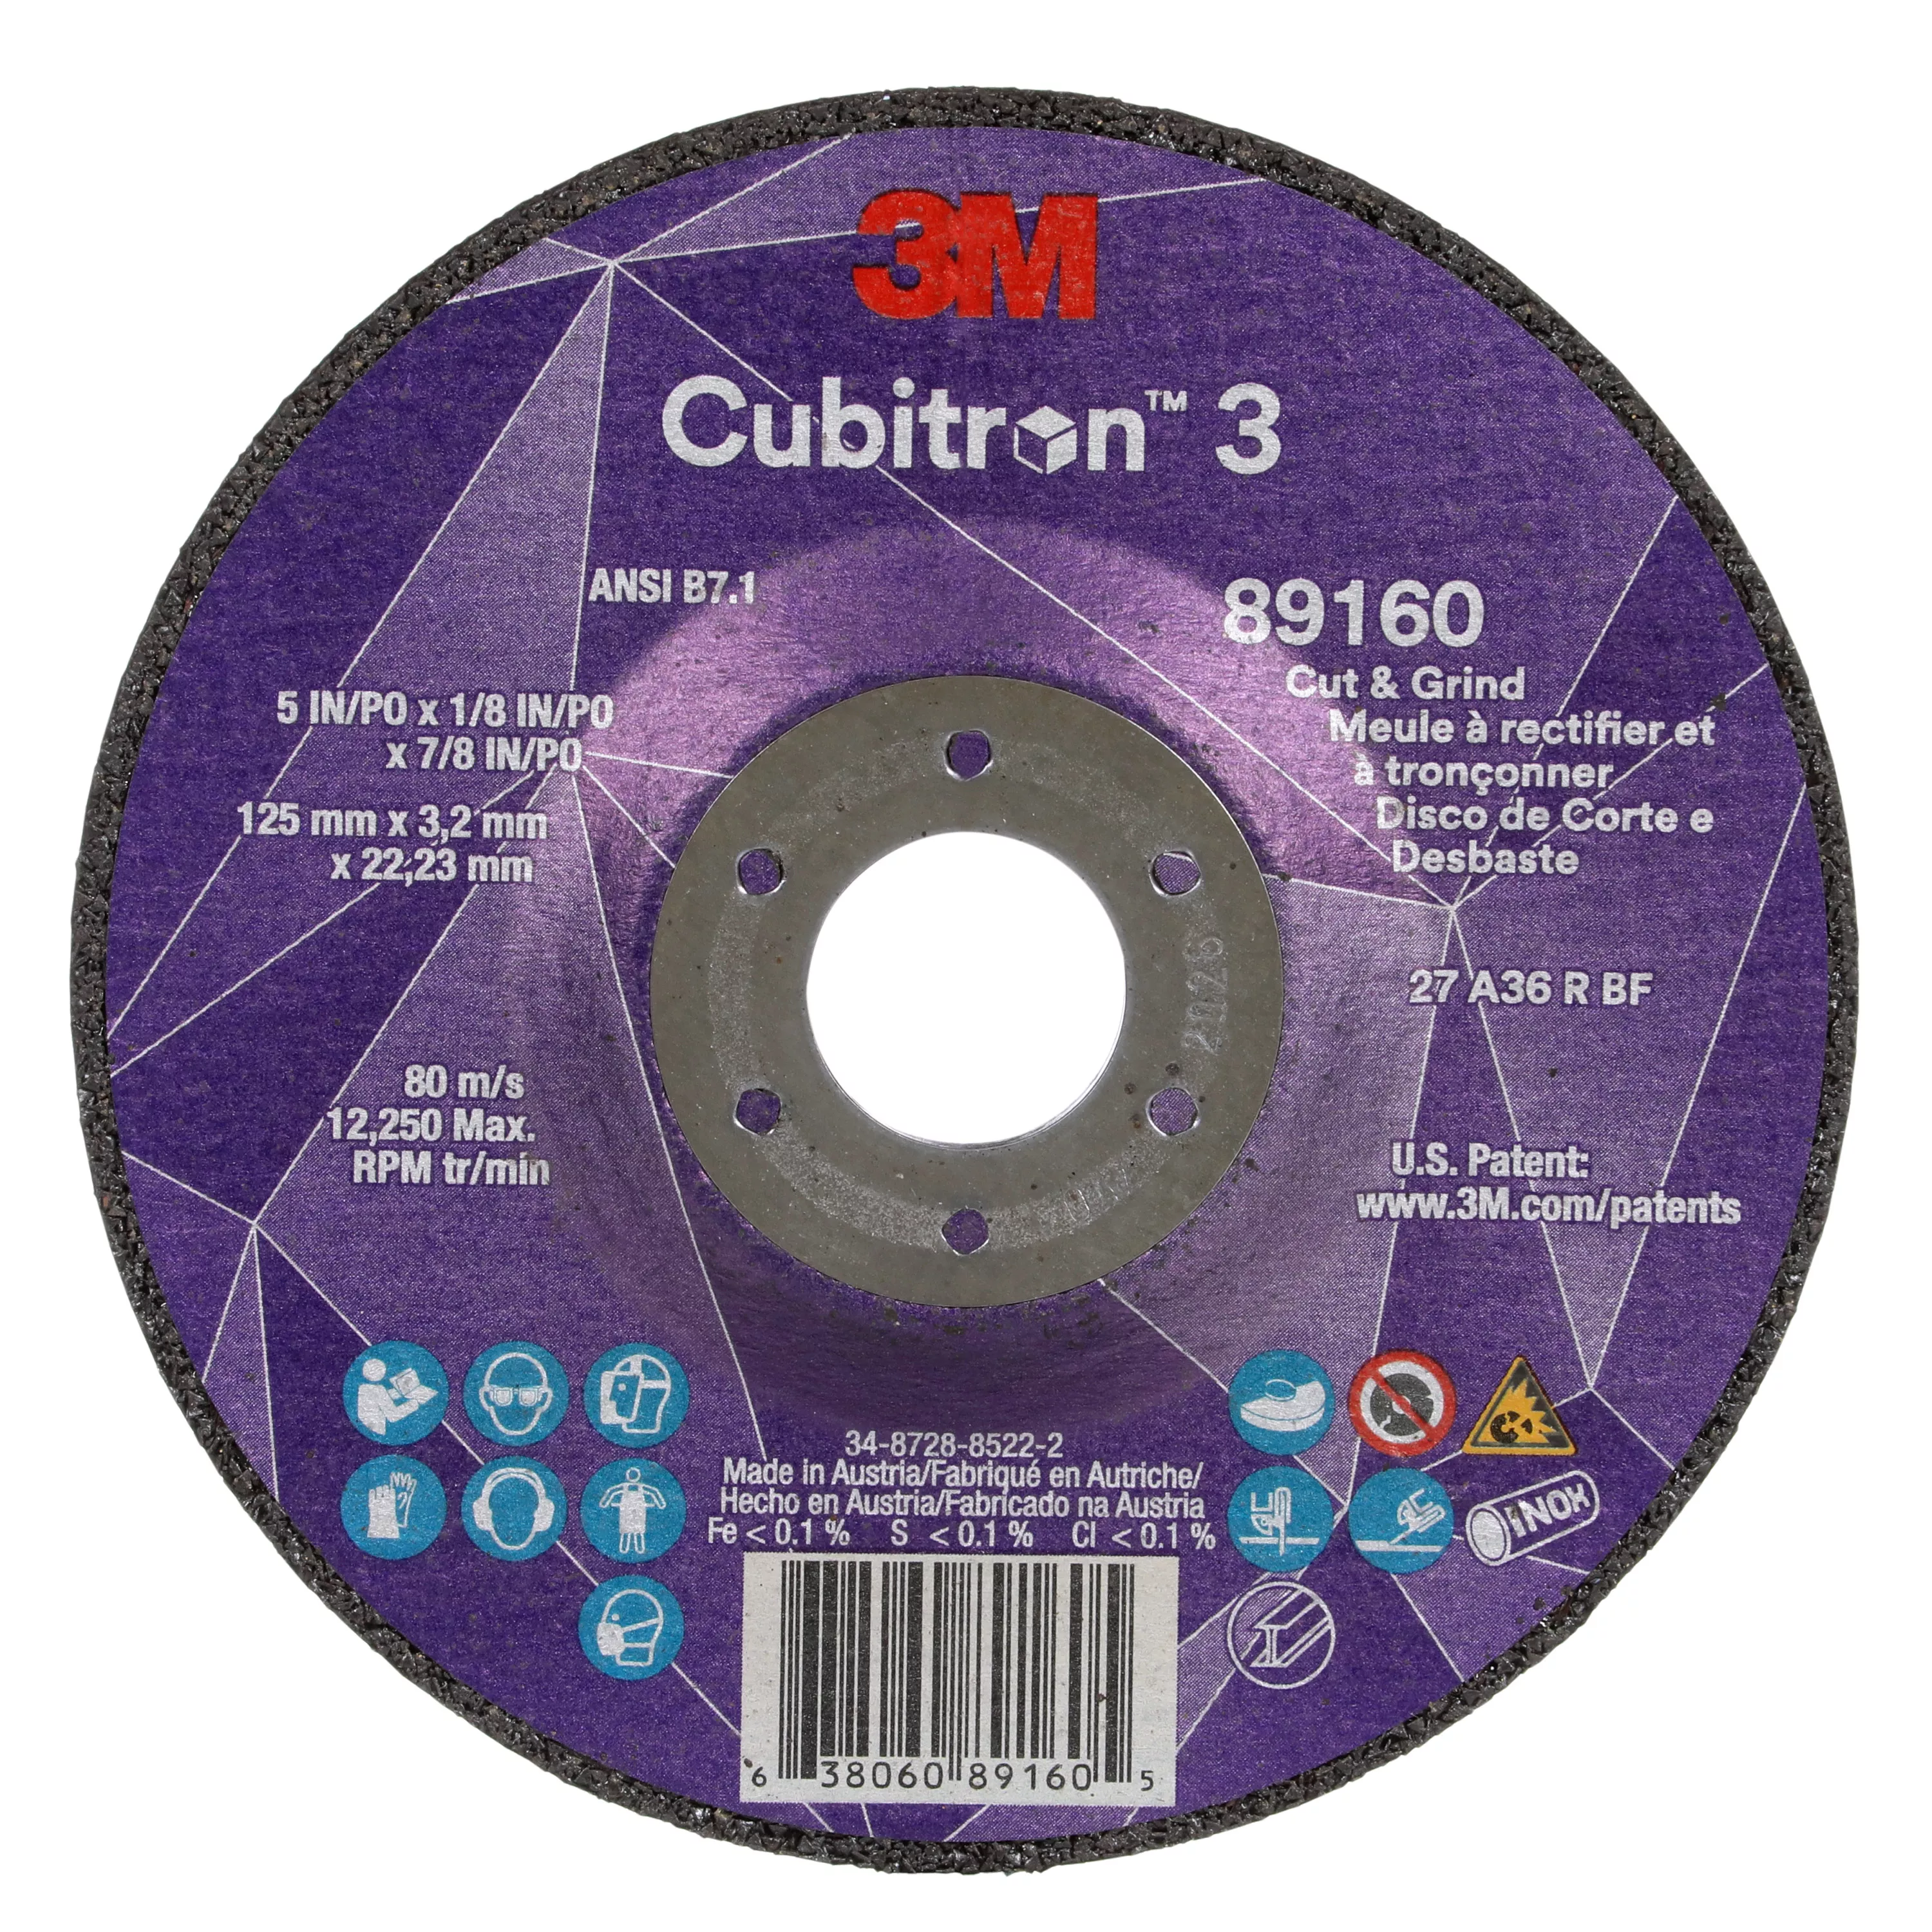 3M™ Cubitron™ 3 Cut and Grind Wheel, 89160, 36+, T27, 5 in x 1/8 in x
7/8 in (125 x 3.2 x 22.23 mm), ANSI, 10/Pack, 20 ea/Case